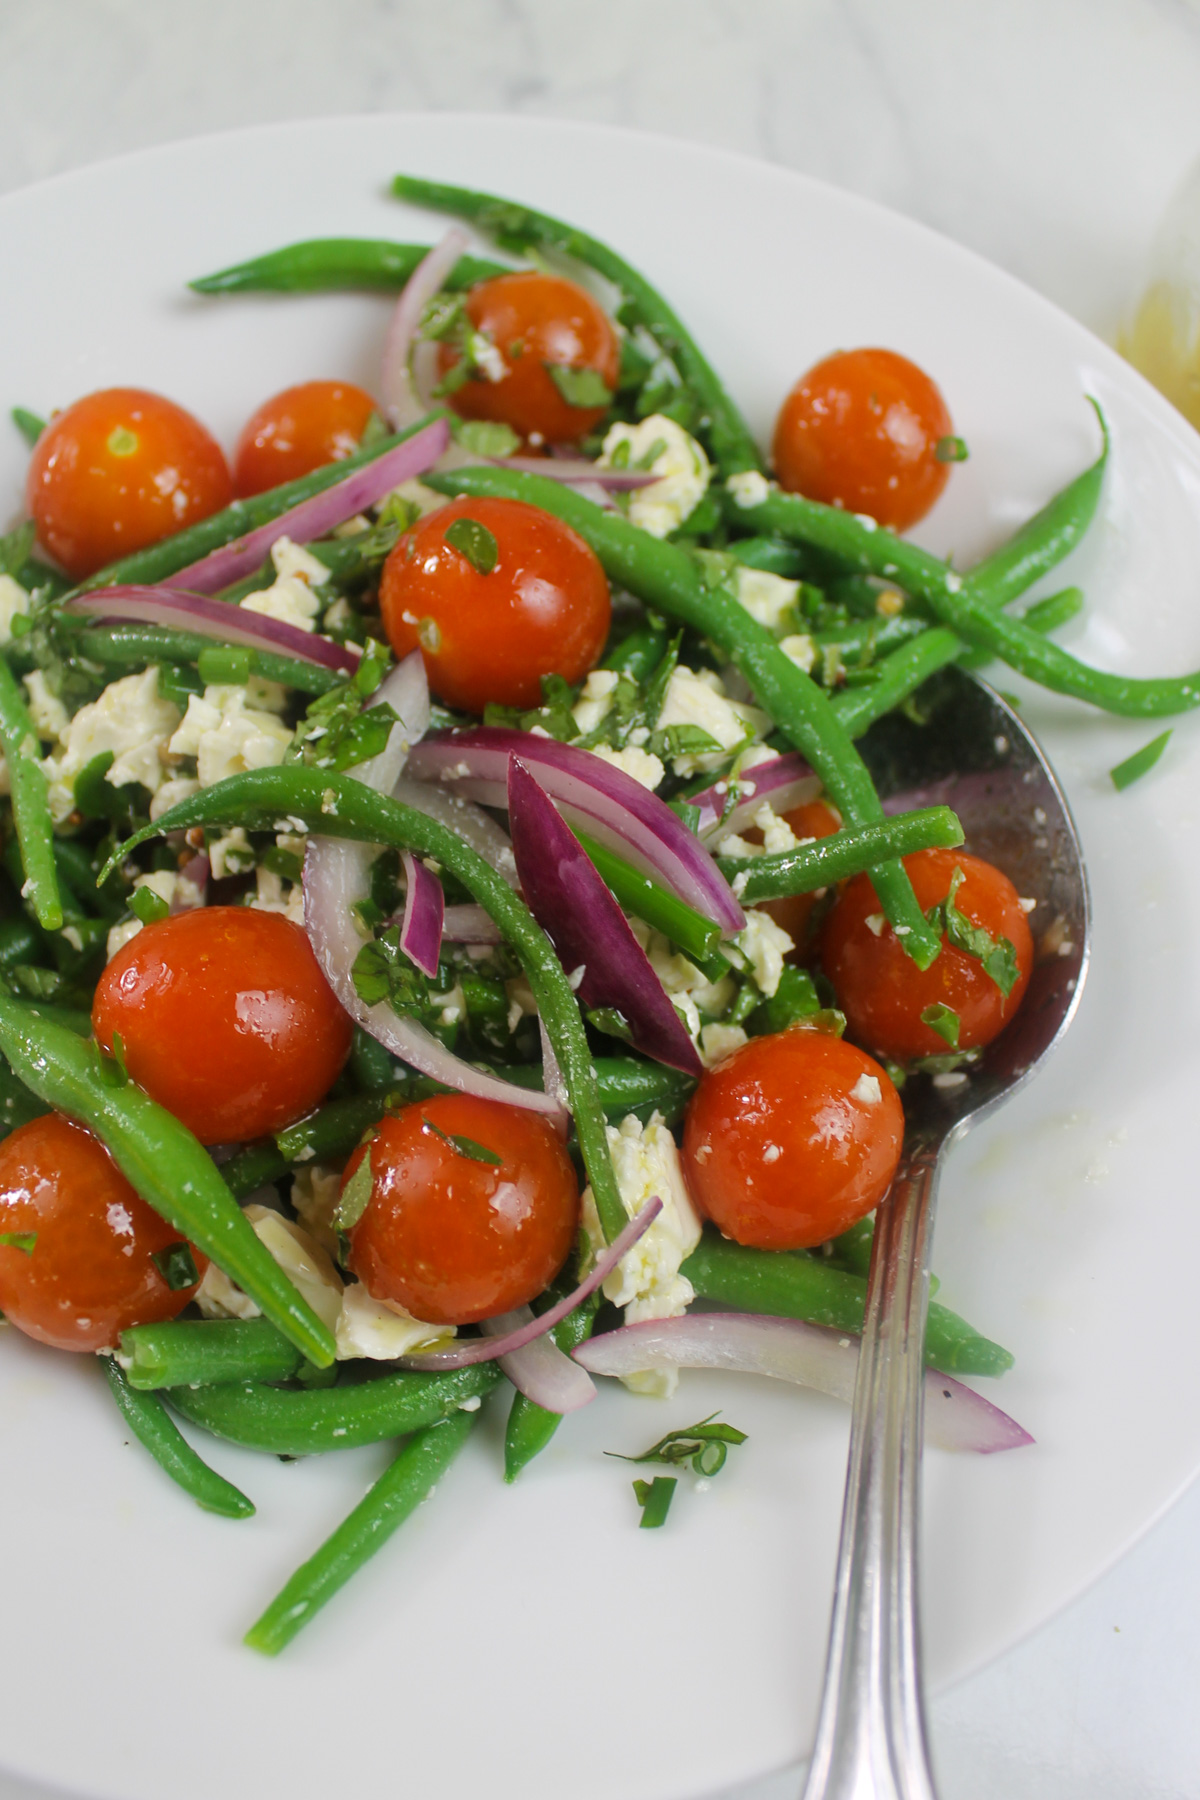 Tangy green bean salad with cherry tomatoes and vinaigrette dressing.